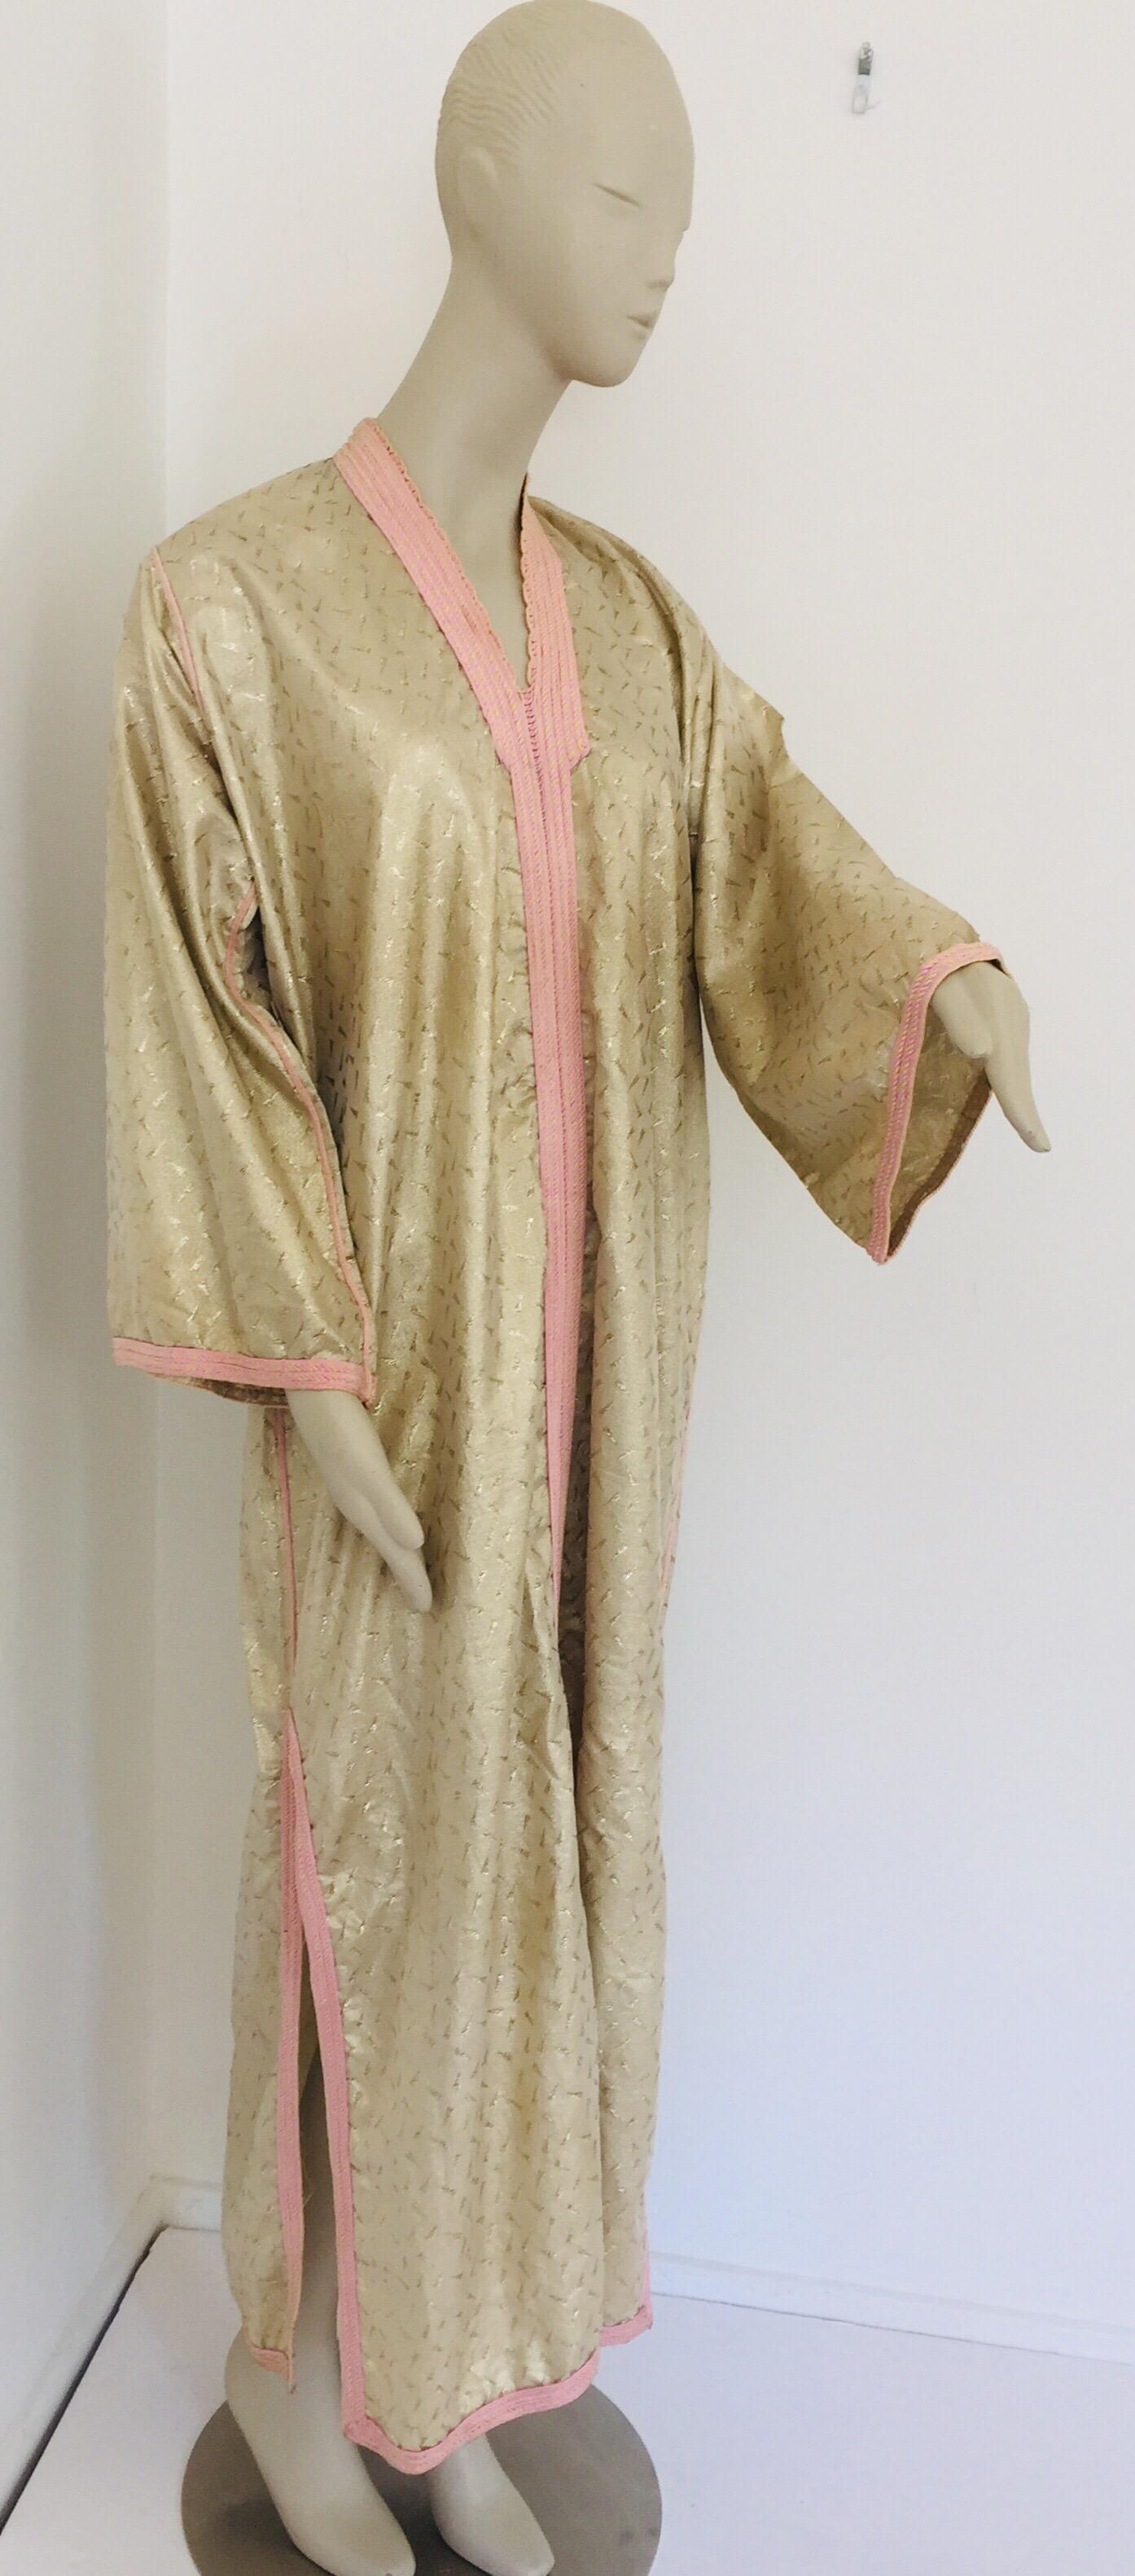 Moroccan evening or interior gold metallic brocade dress kaftan with pink trim.
Handmade vintage exotic, 1970s metallic brocade caftan gown from North Africa, Morocco.
The luminous gold metallic Moroccan caftan maxi dress is made in a subtle